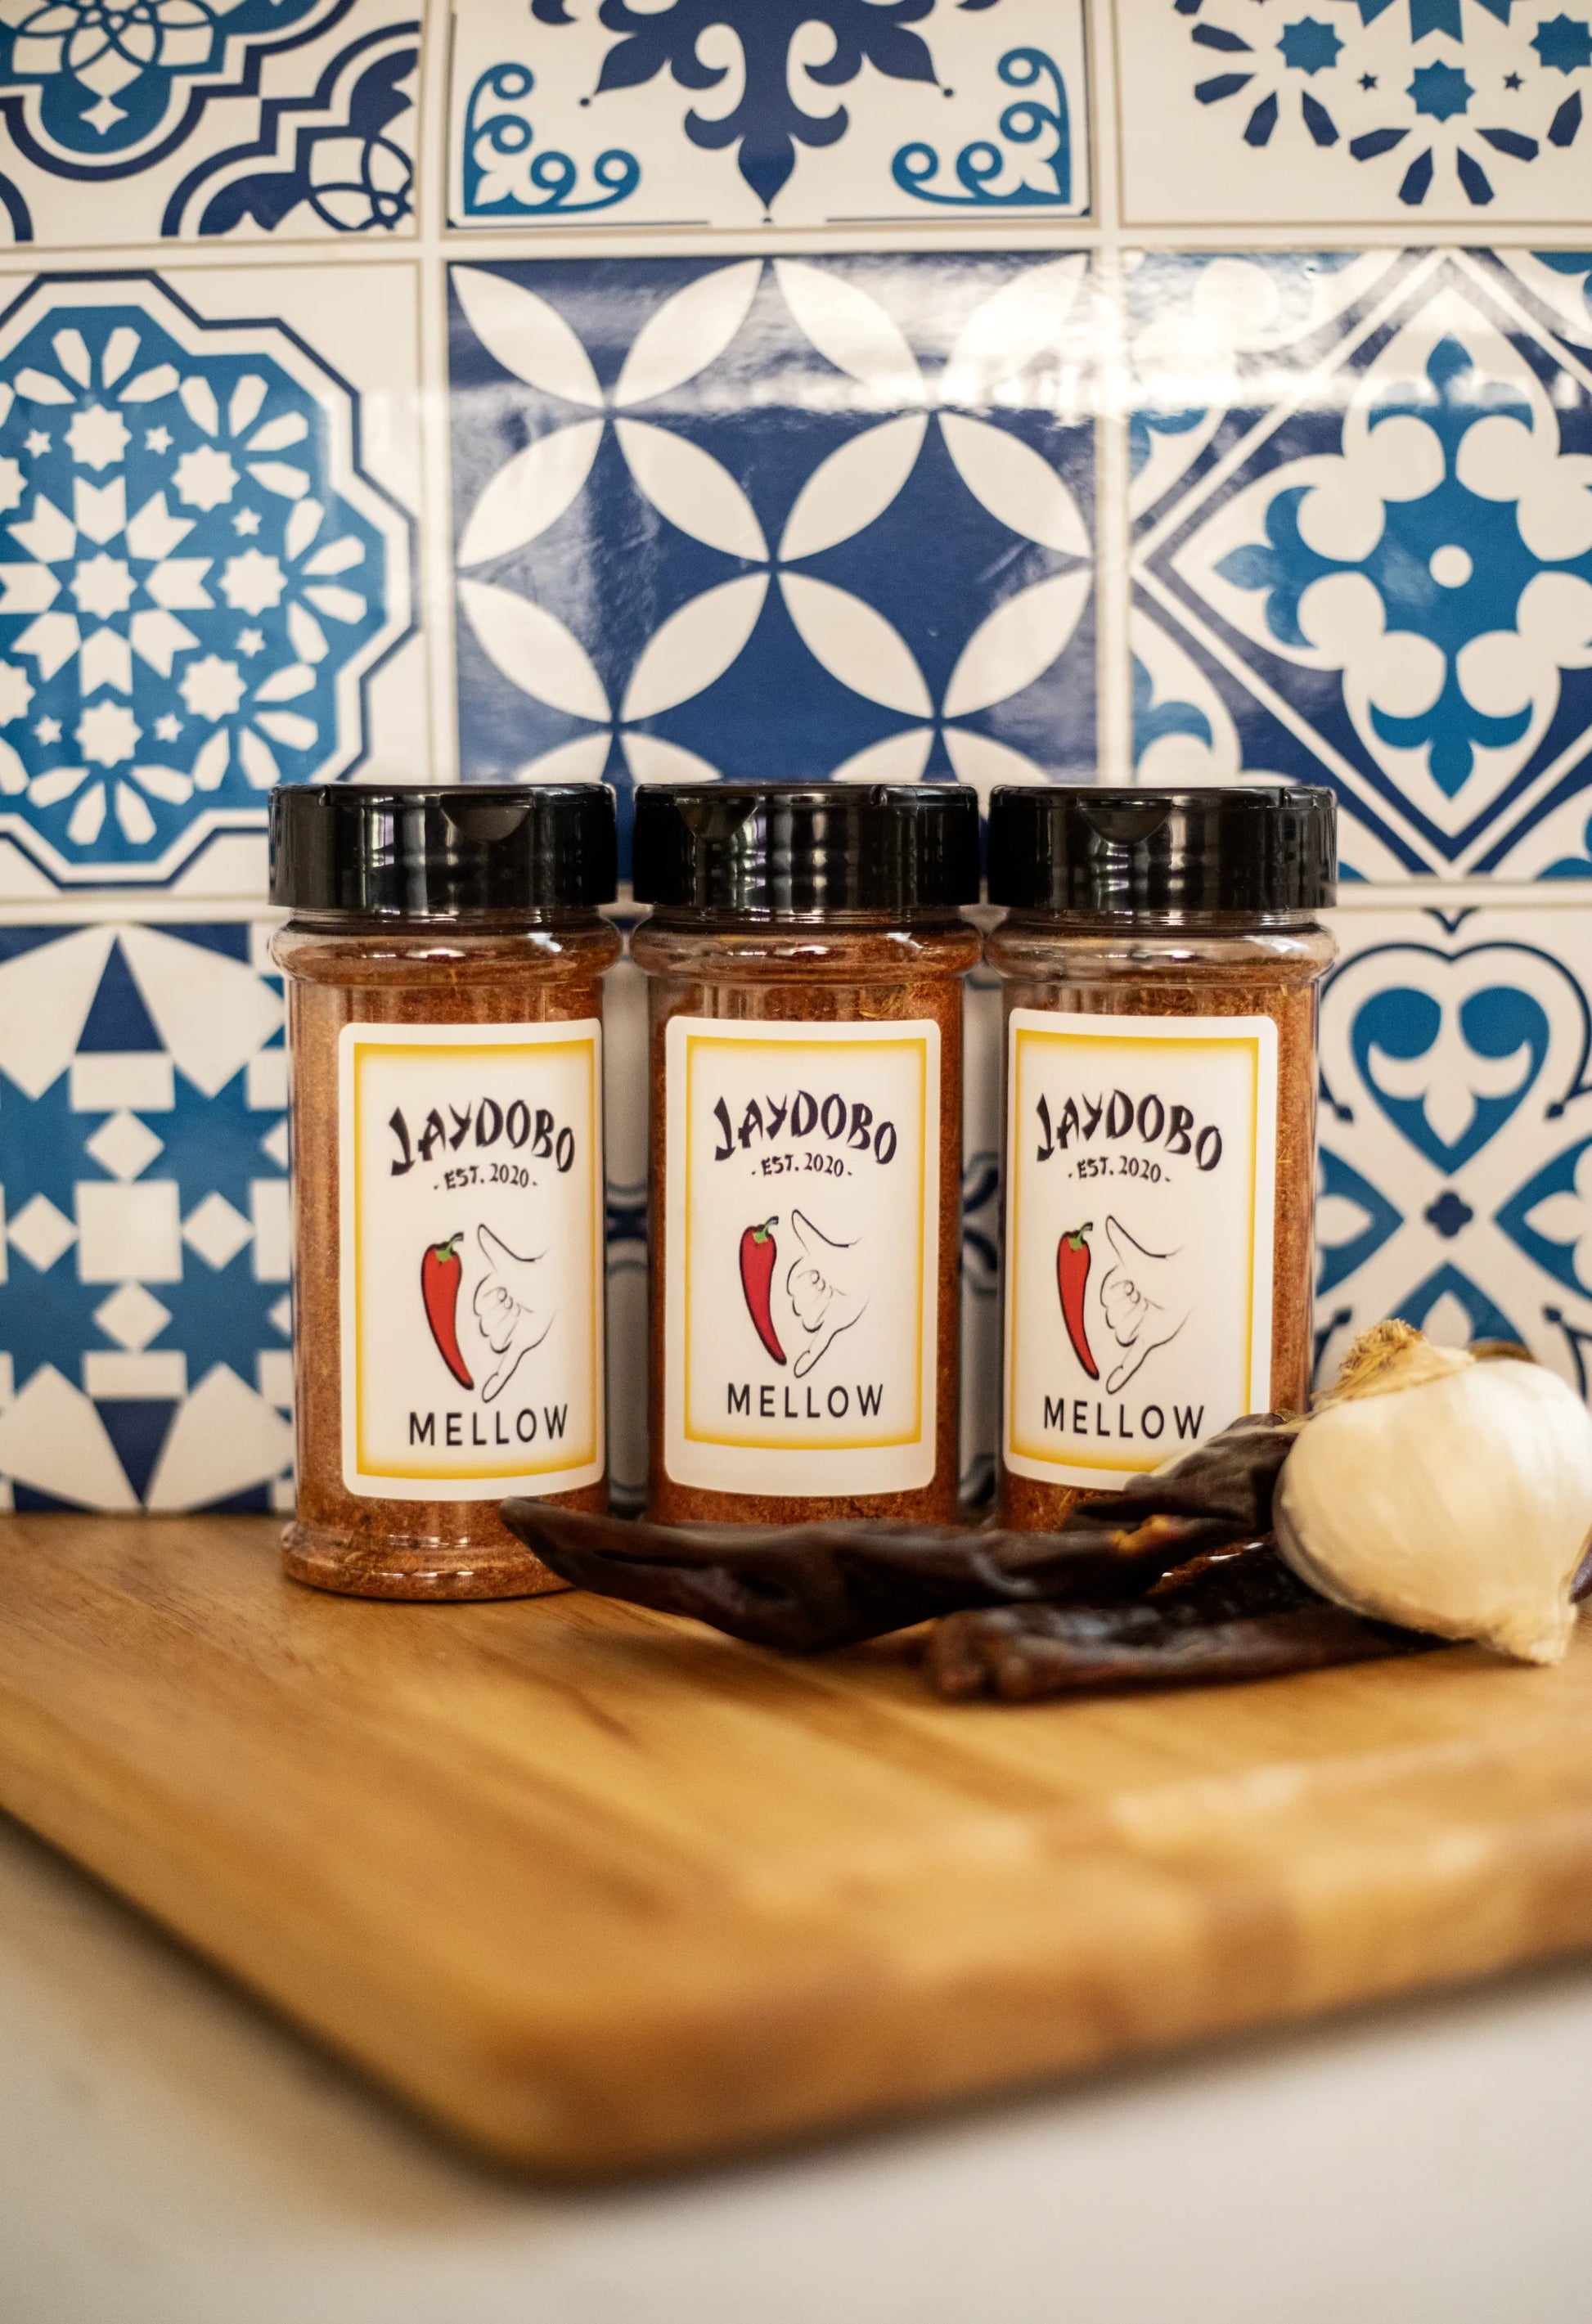  A bundle of three Mellow Jaydobo Spice Blend bottles on a wooden surface with garlic and dried chiles, set against a colorful tiled background.